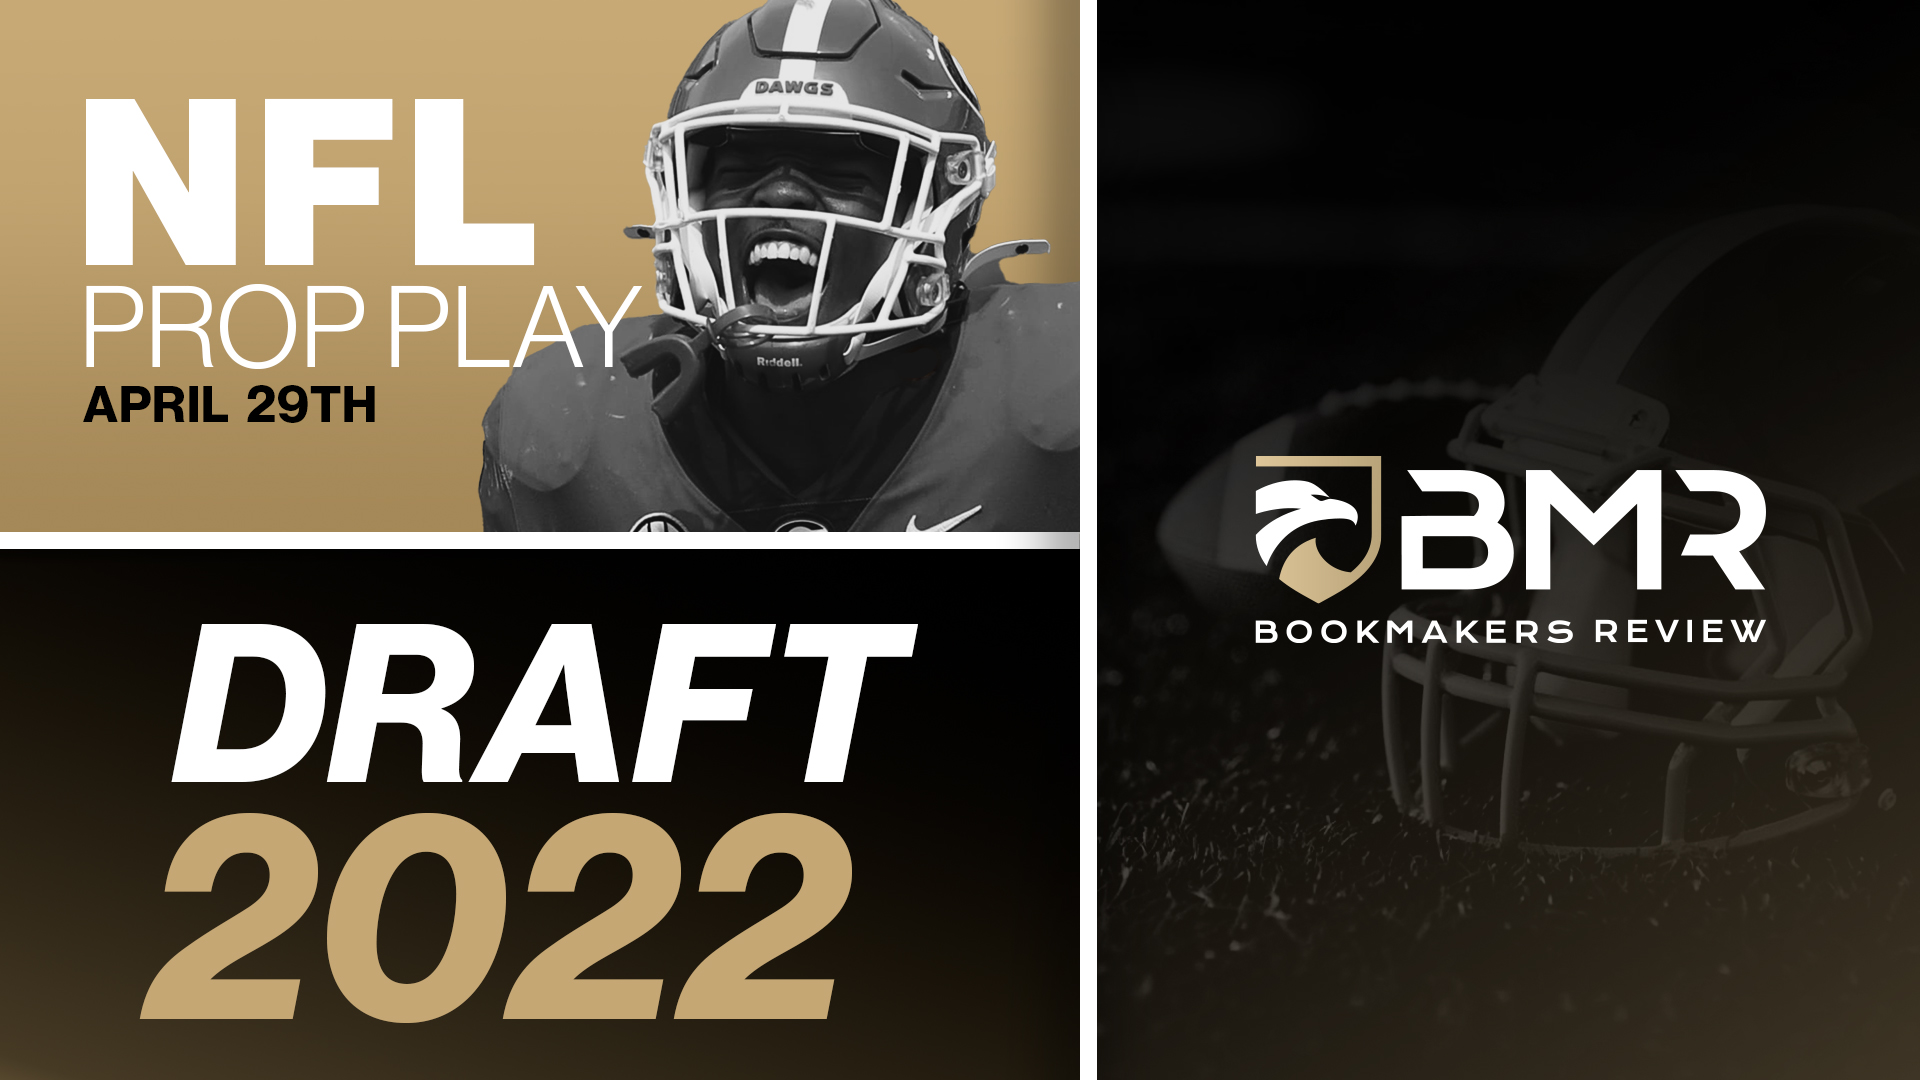 NFL Draft 2022 | Free NFL Draft Player Prop Pick on Nakobe Dean by Donnie RightSide - Apr. 29th